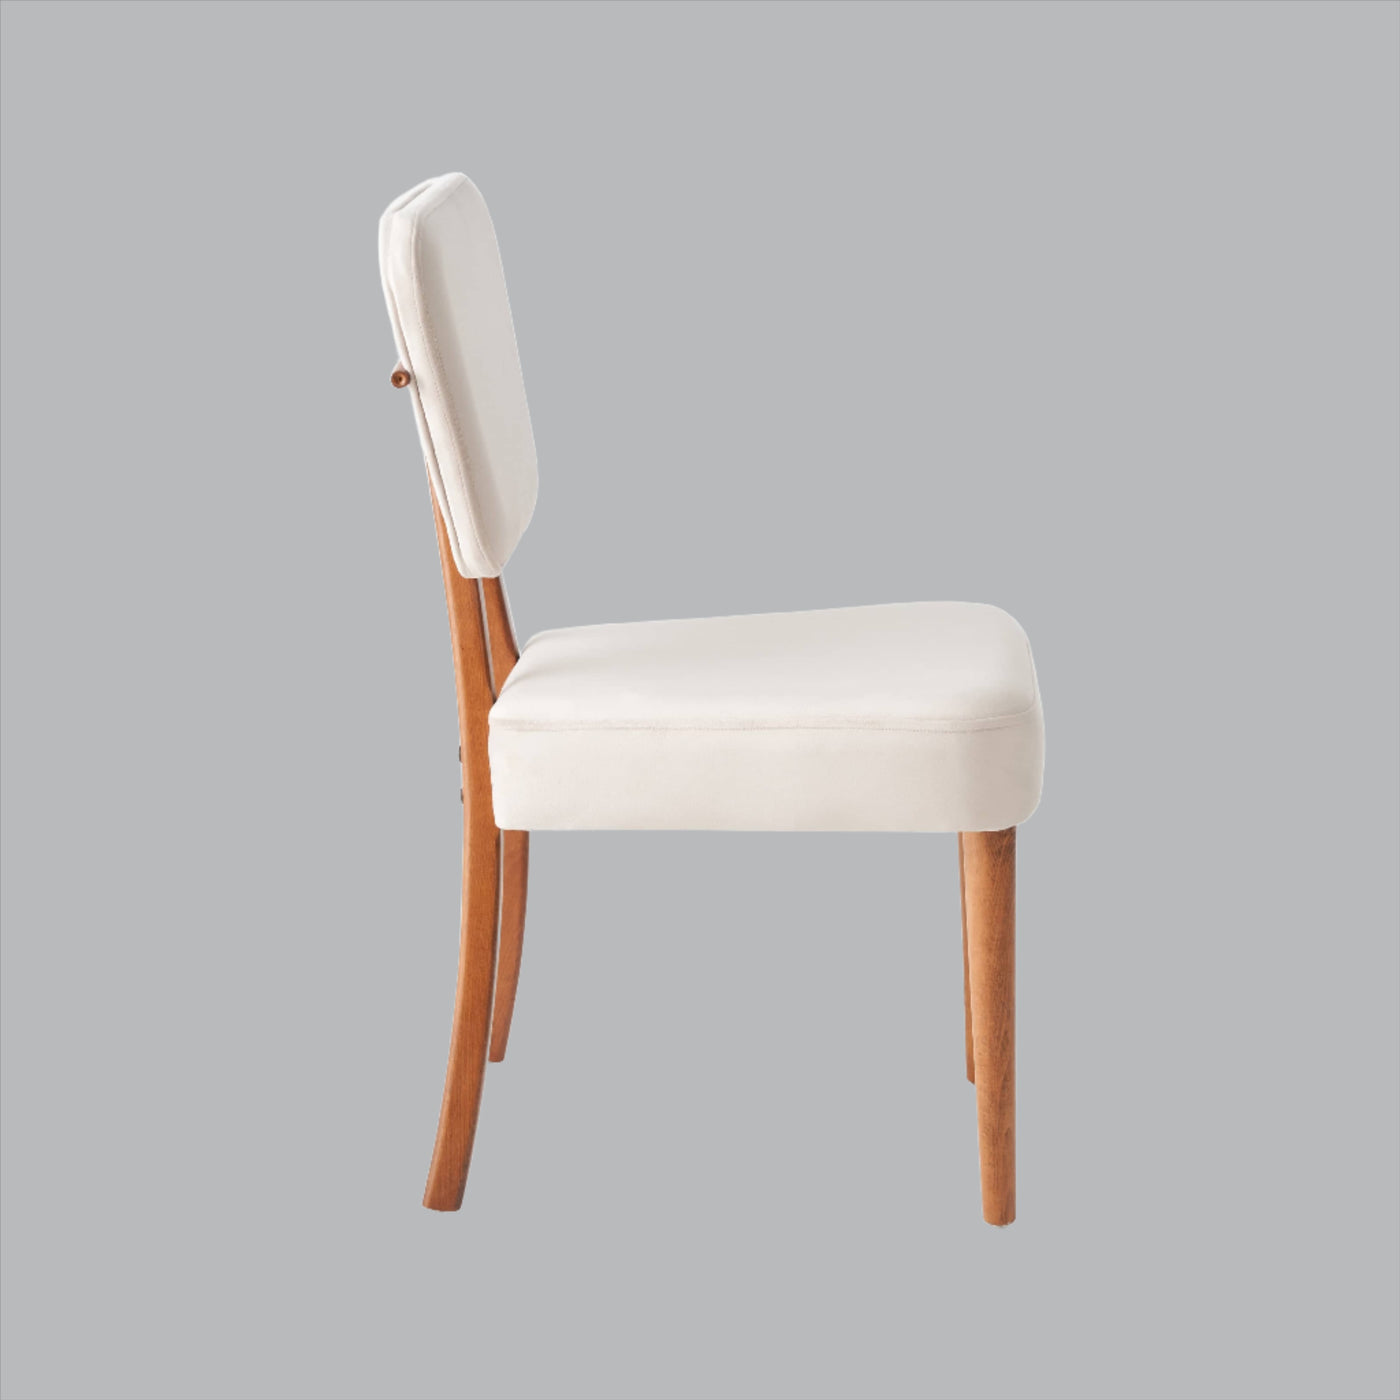 Piet Set of 4 Dining Chairs, Off-White Dining Chairs & Benches sazy.com